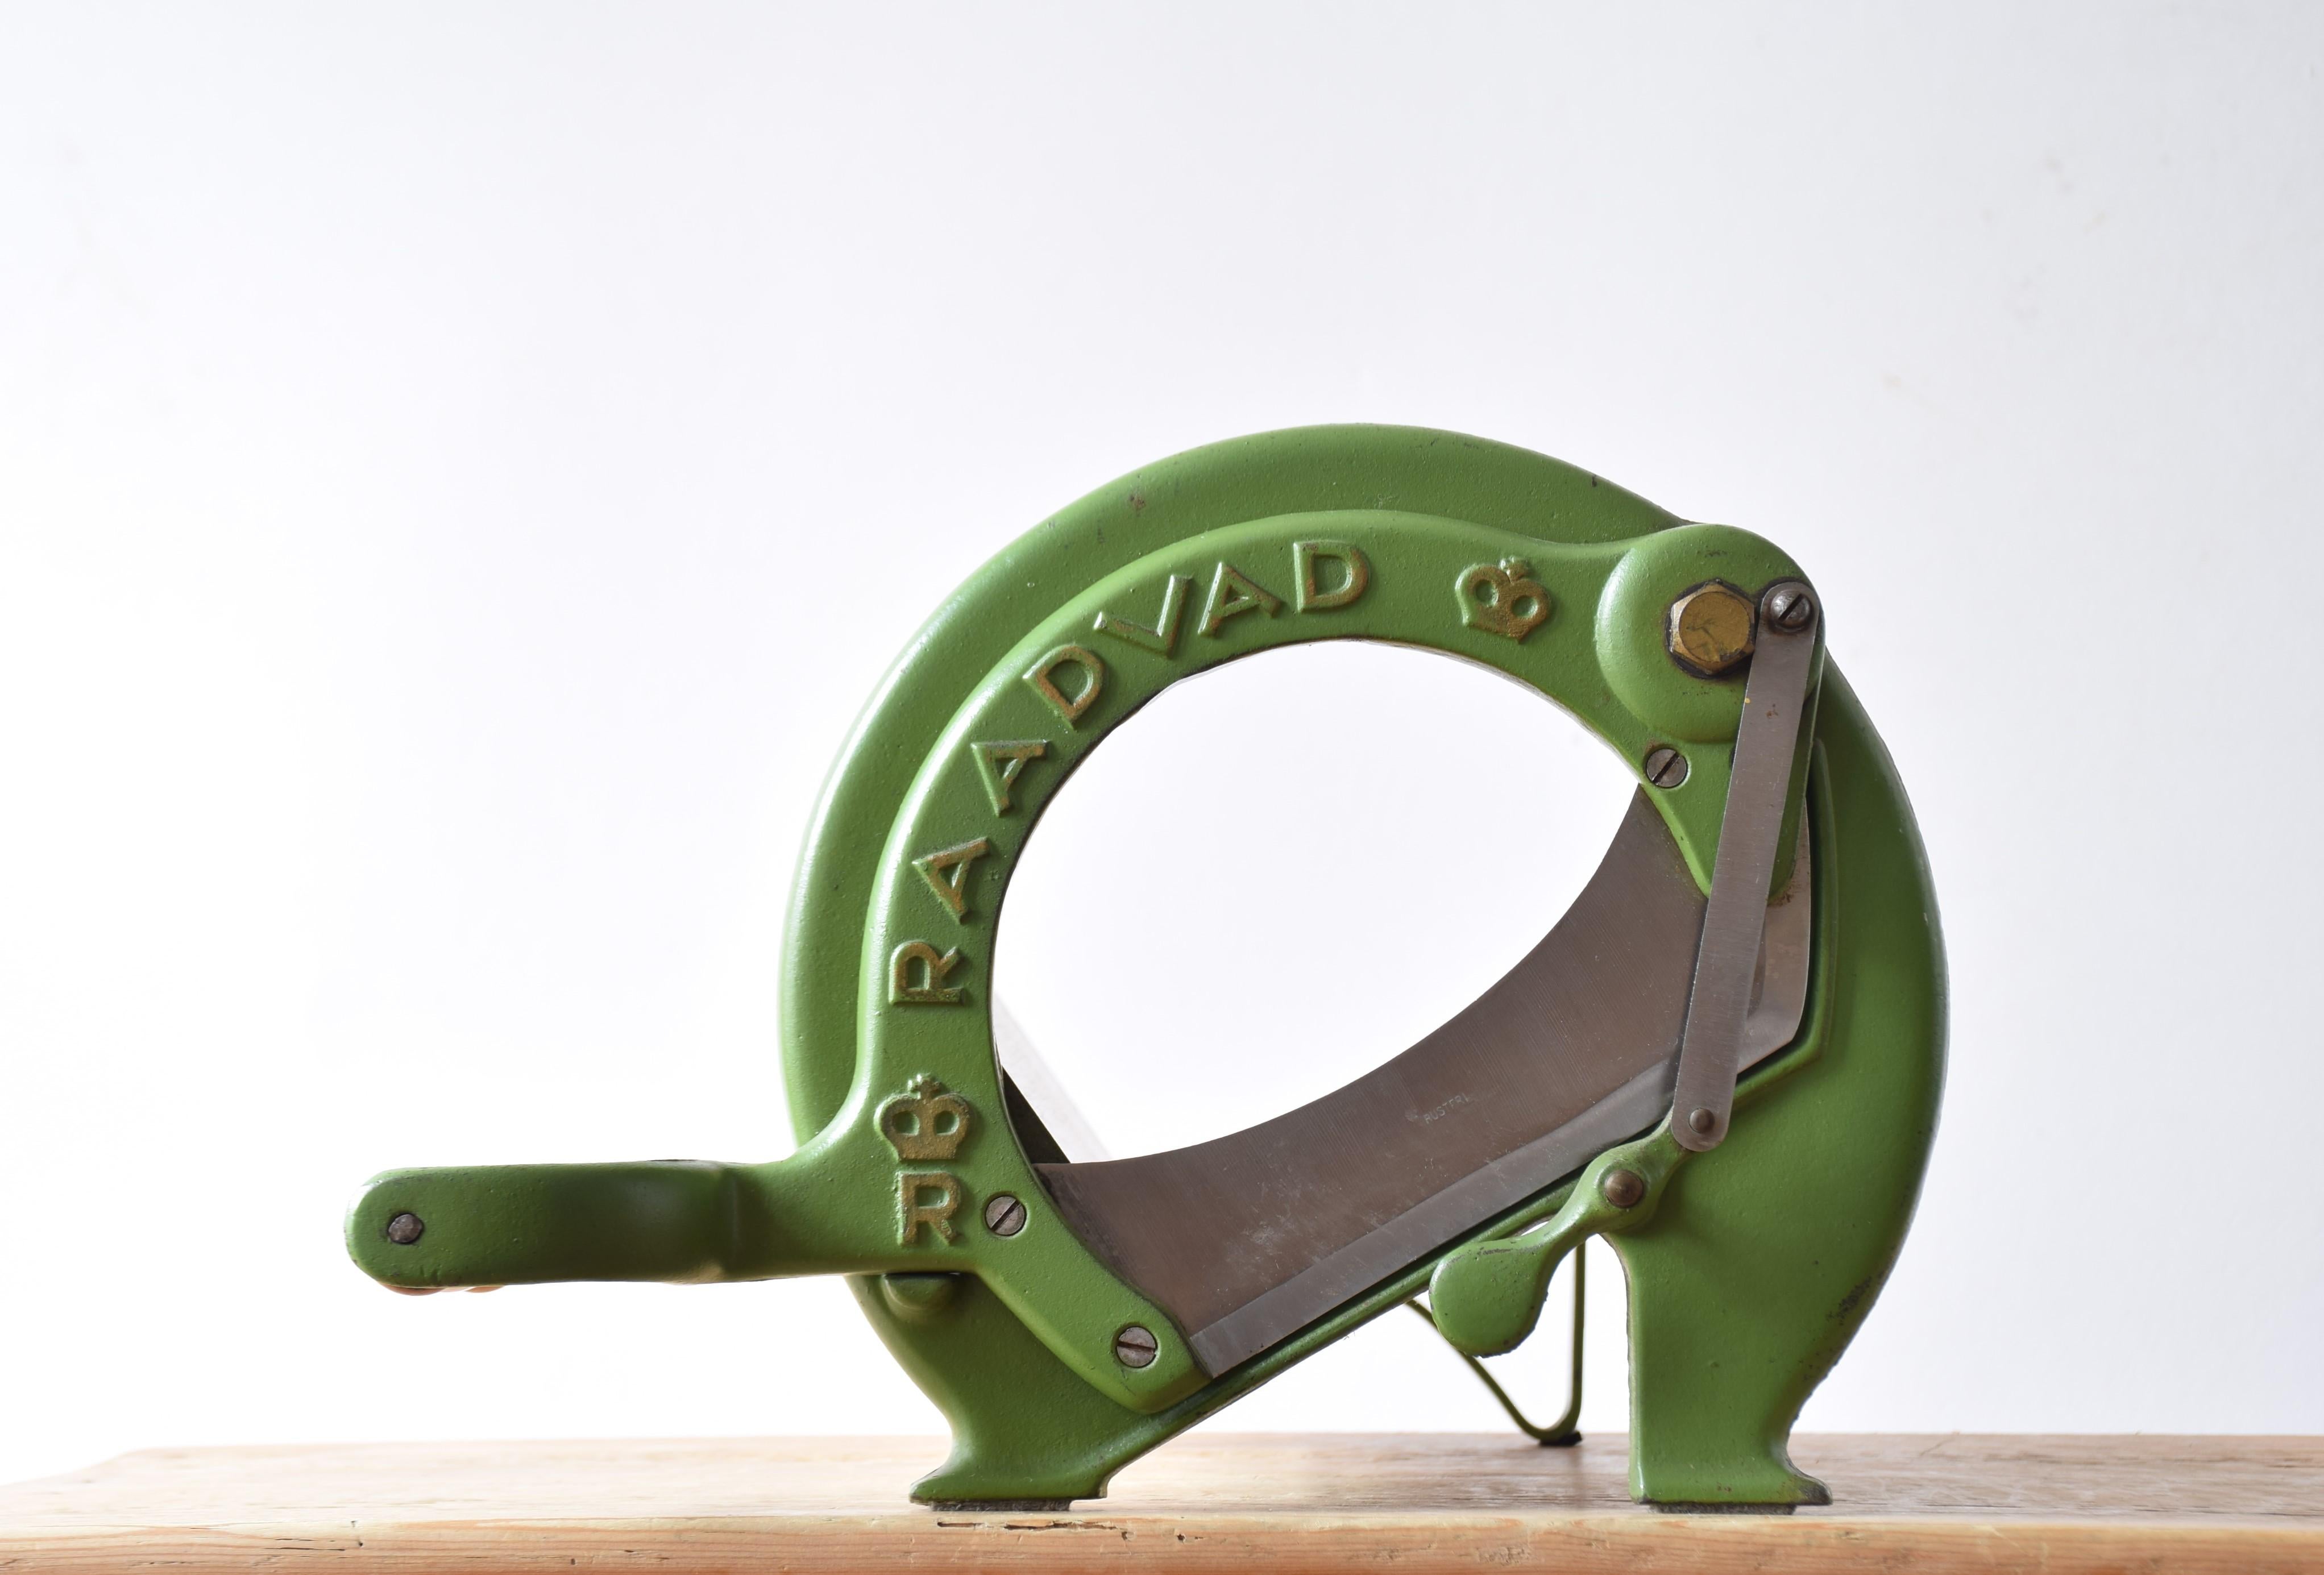 This iconic Danish bread slicer was produced by Raadvad in Denmark circa 1940s-1960s and designed in the 1930s. It comes with original green lacquer and still shows some of the original golden paint on letters and crowns. The bread slicer is fully